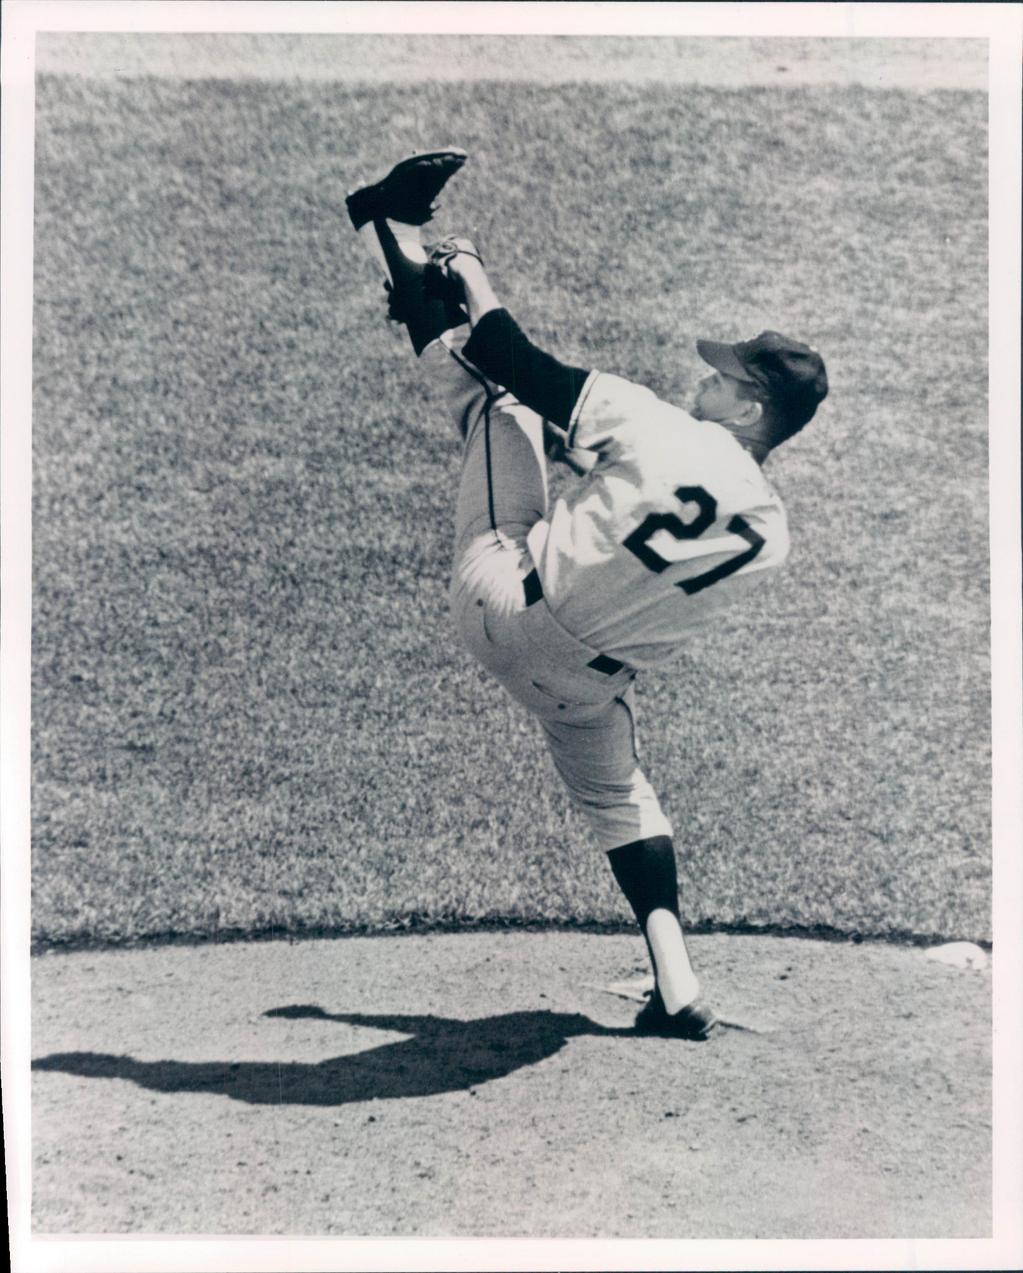 Happy 77th birthday to the Dominican Dandy, Hall of Famer Juan Marichal. 